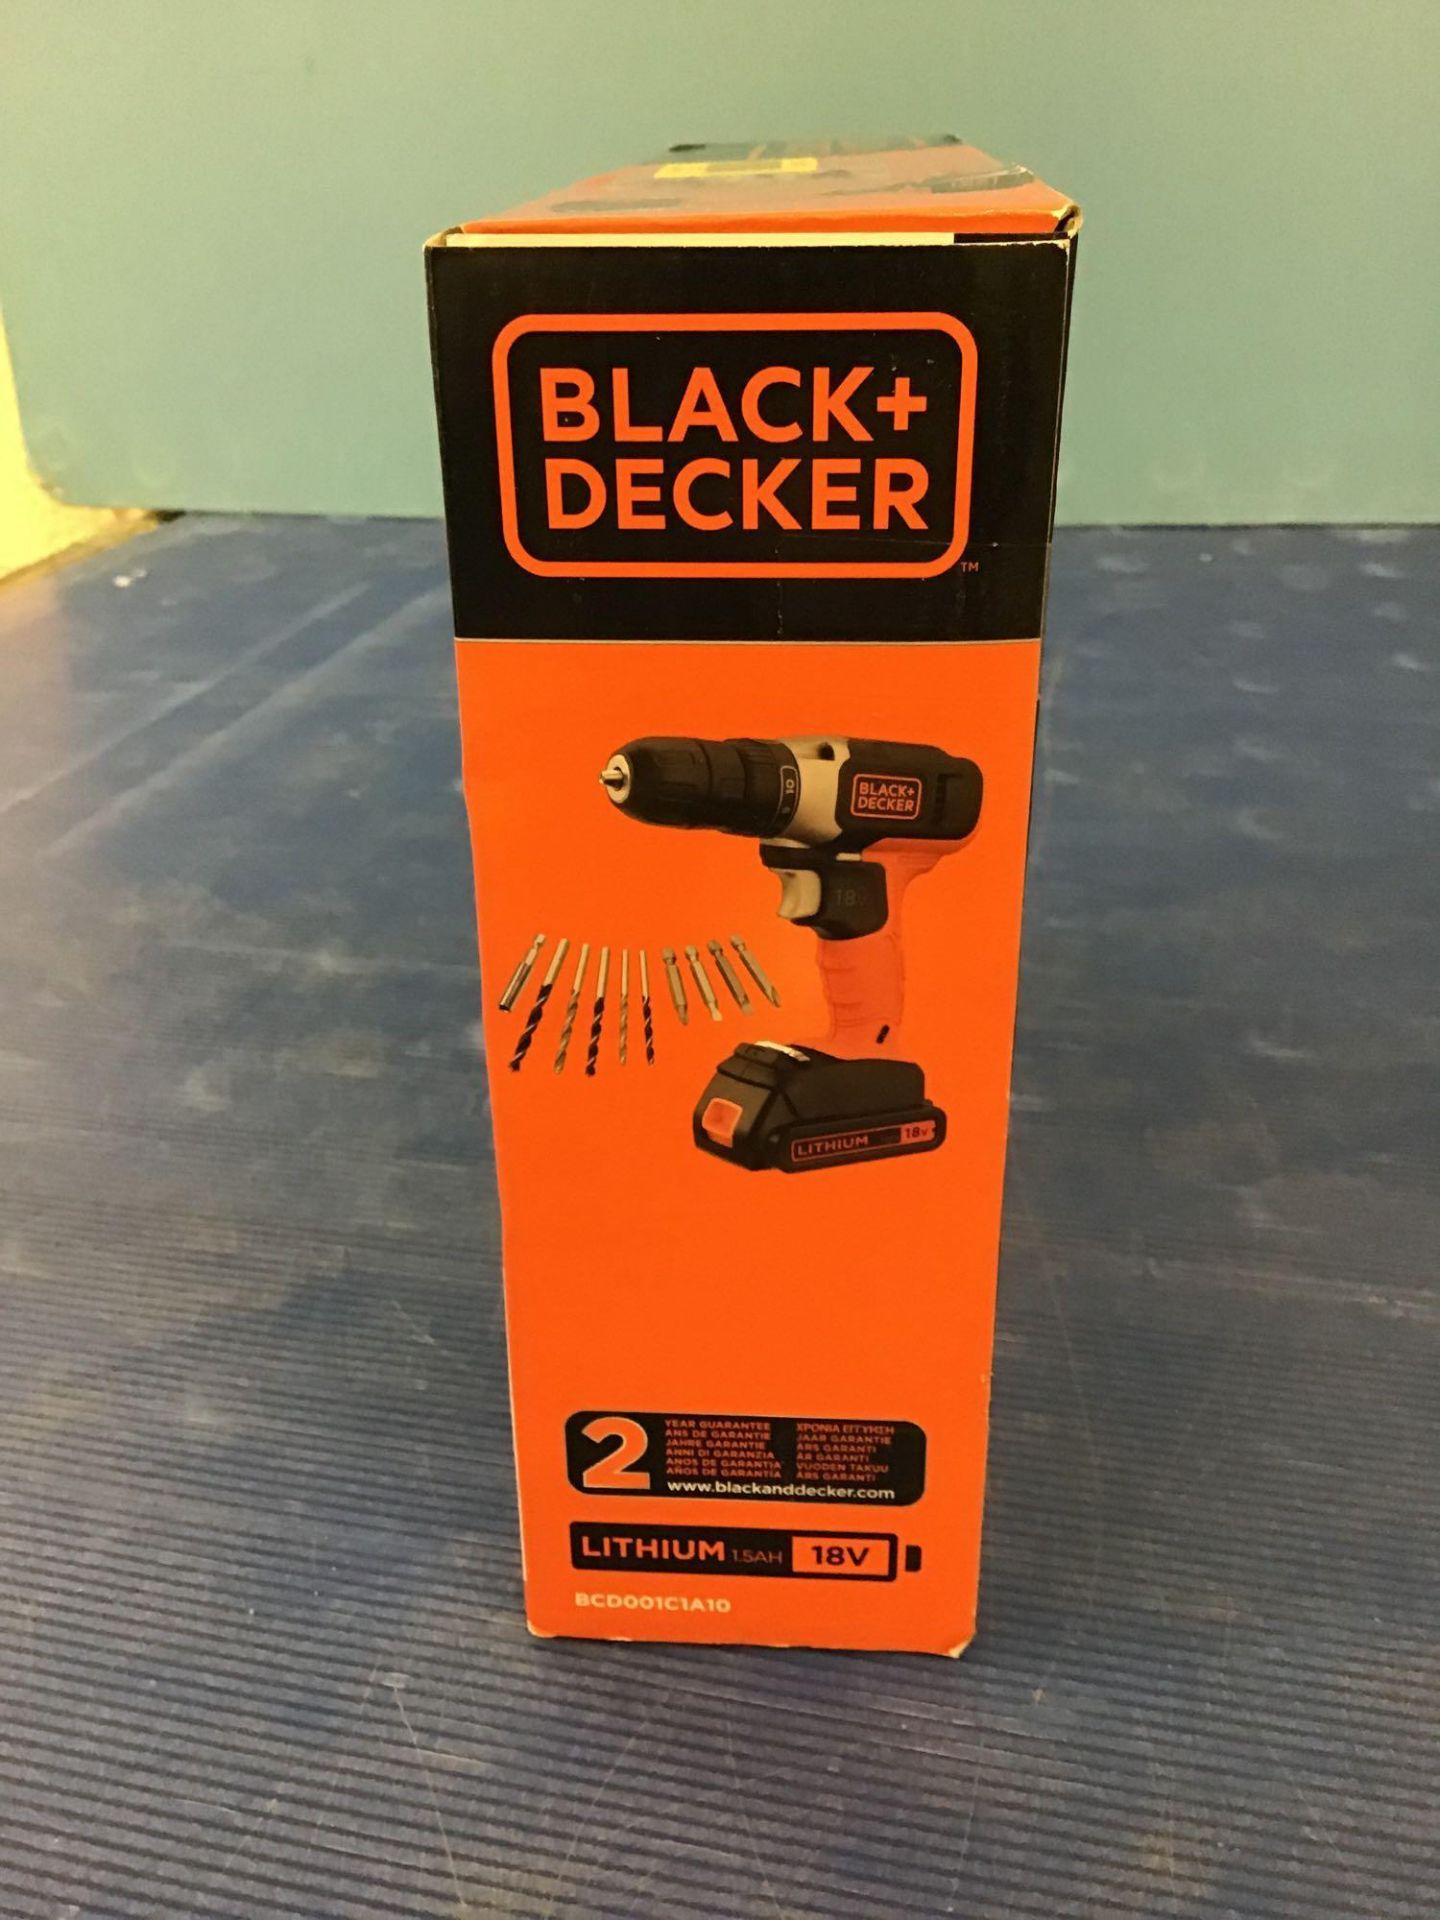 Black + Decker 18V Lithium-ion Drill Driver with Accessories, £50.00 RRP - Image 3 of 6